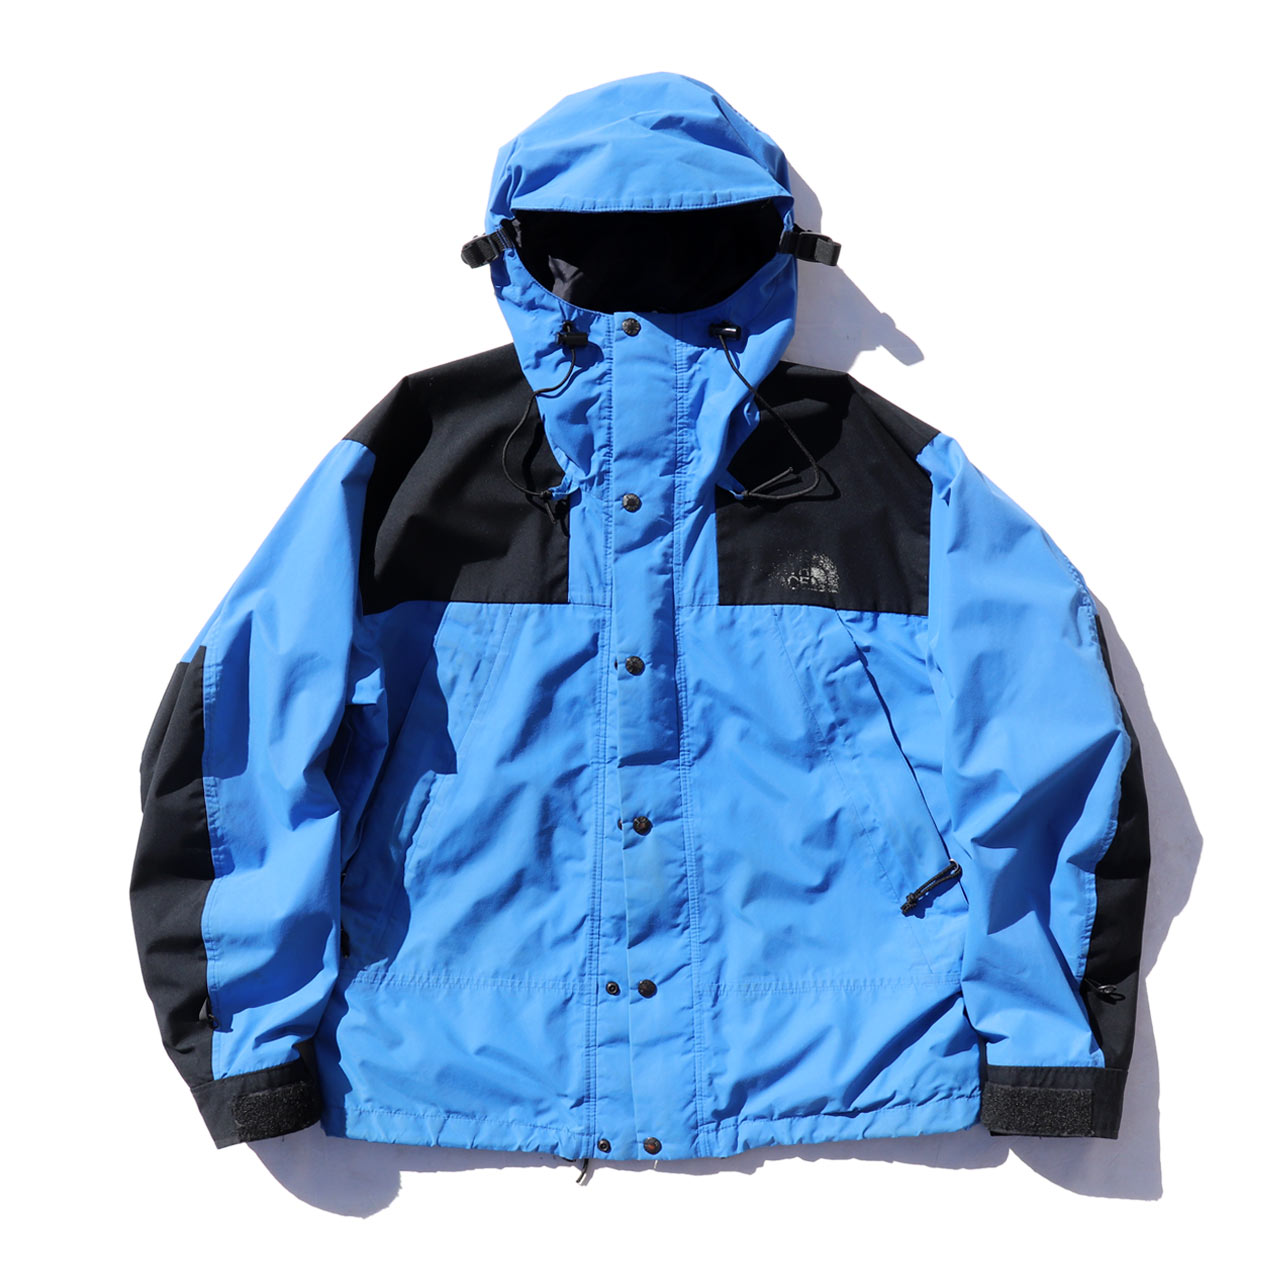 POST JUNK / 90's THE NORTH FACE Mountain Jacket Early Model Made